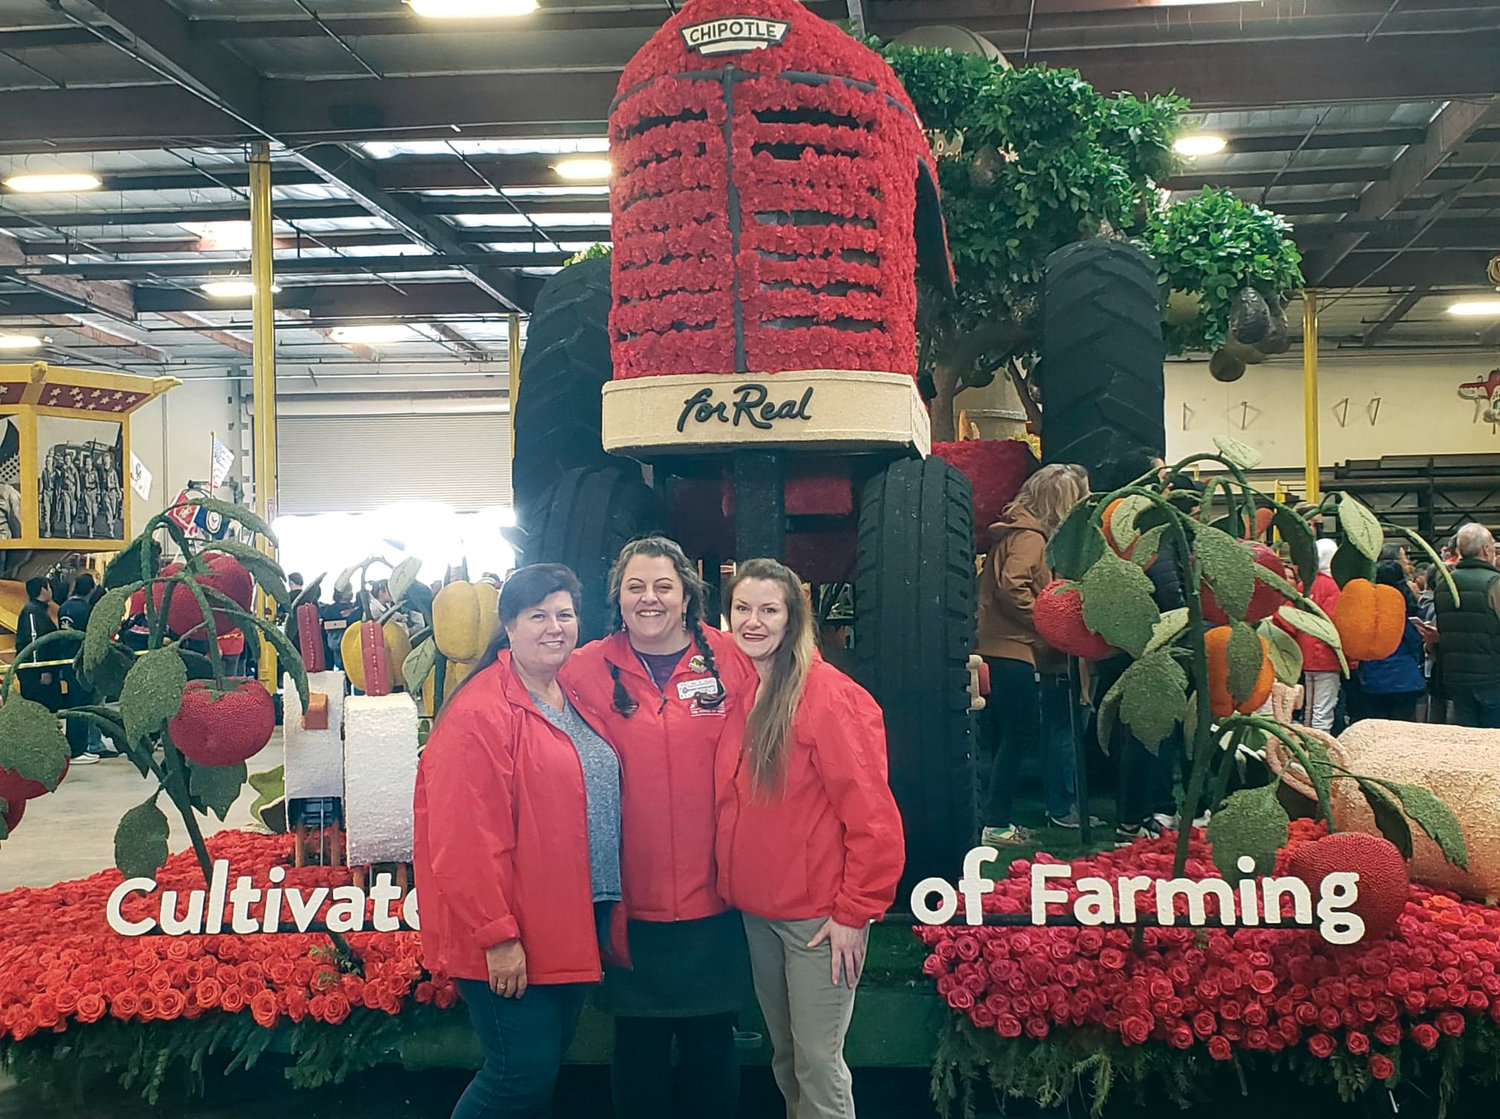 Sharrai Morgan, owner of Holly’s Fine Flowers in Port Townsend, is flanked by members of her “flower family” in front of their completed float for the 2010 Rose Parade.